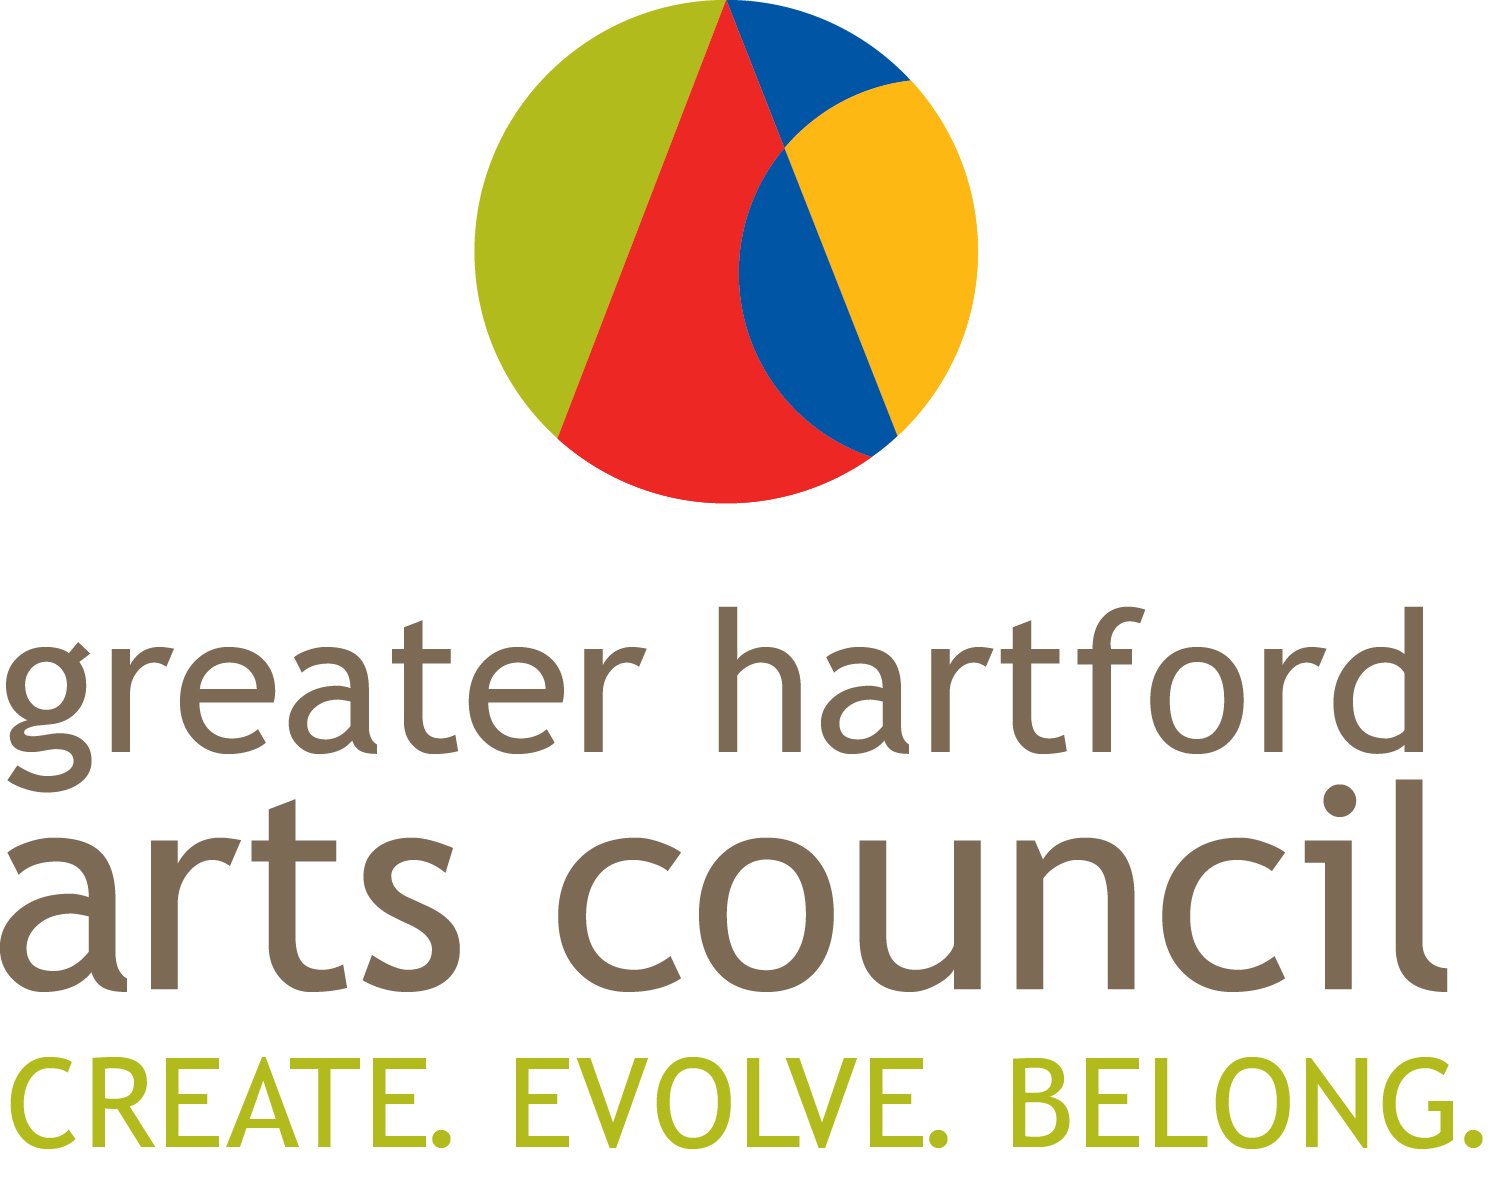 Creative Youth Workforce - Greater Hartford Arts Council